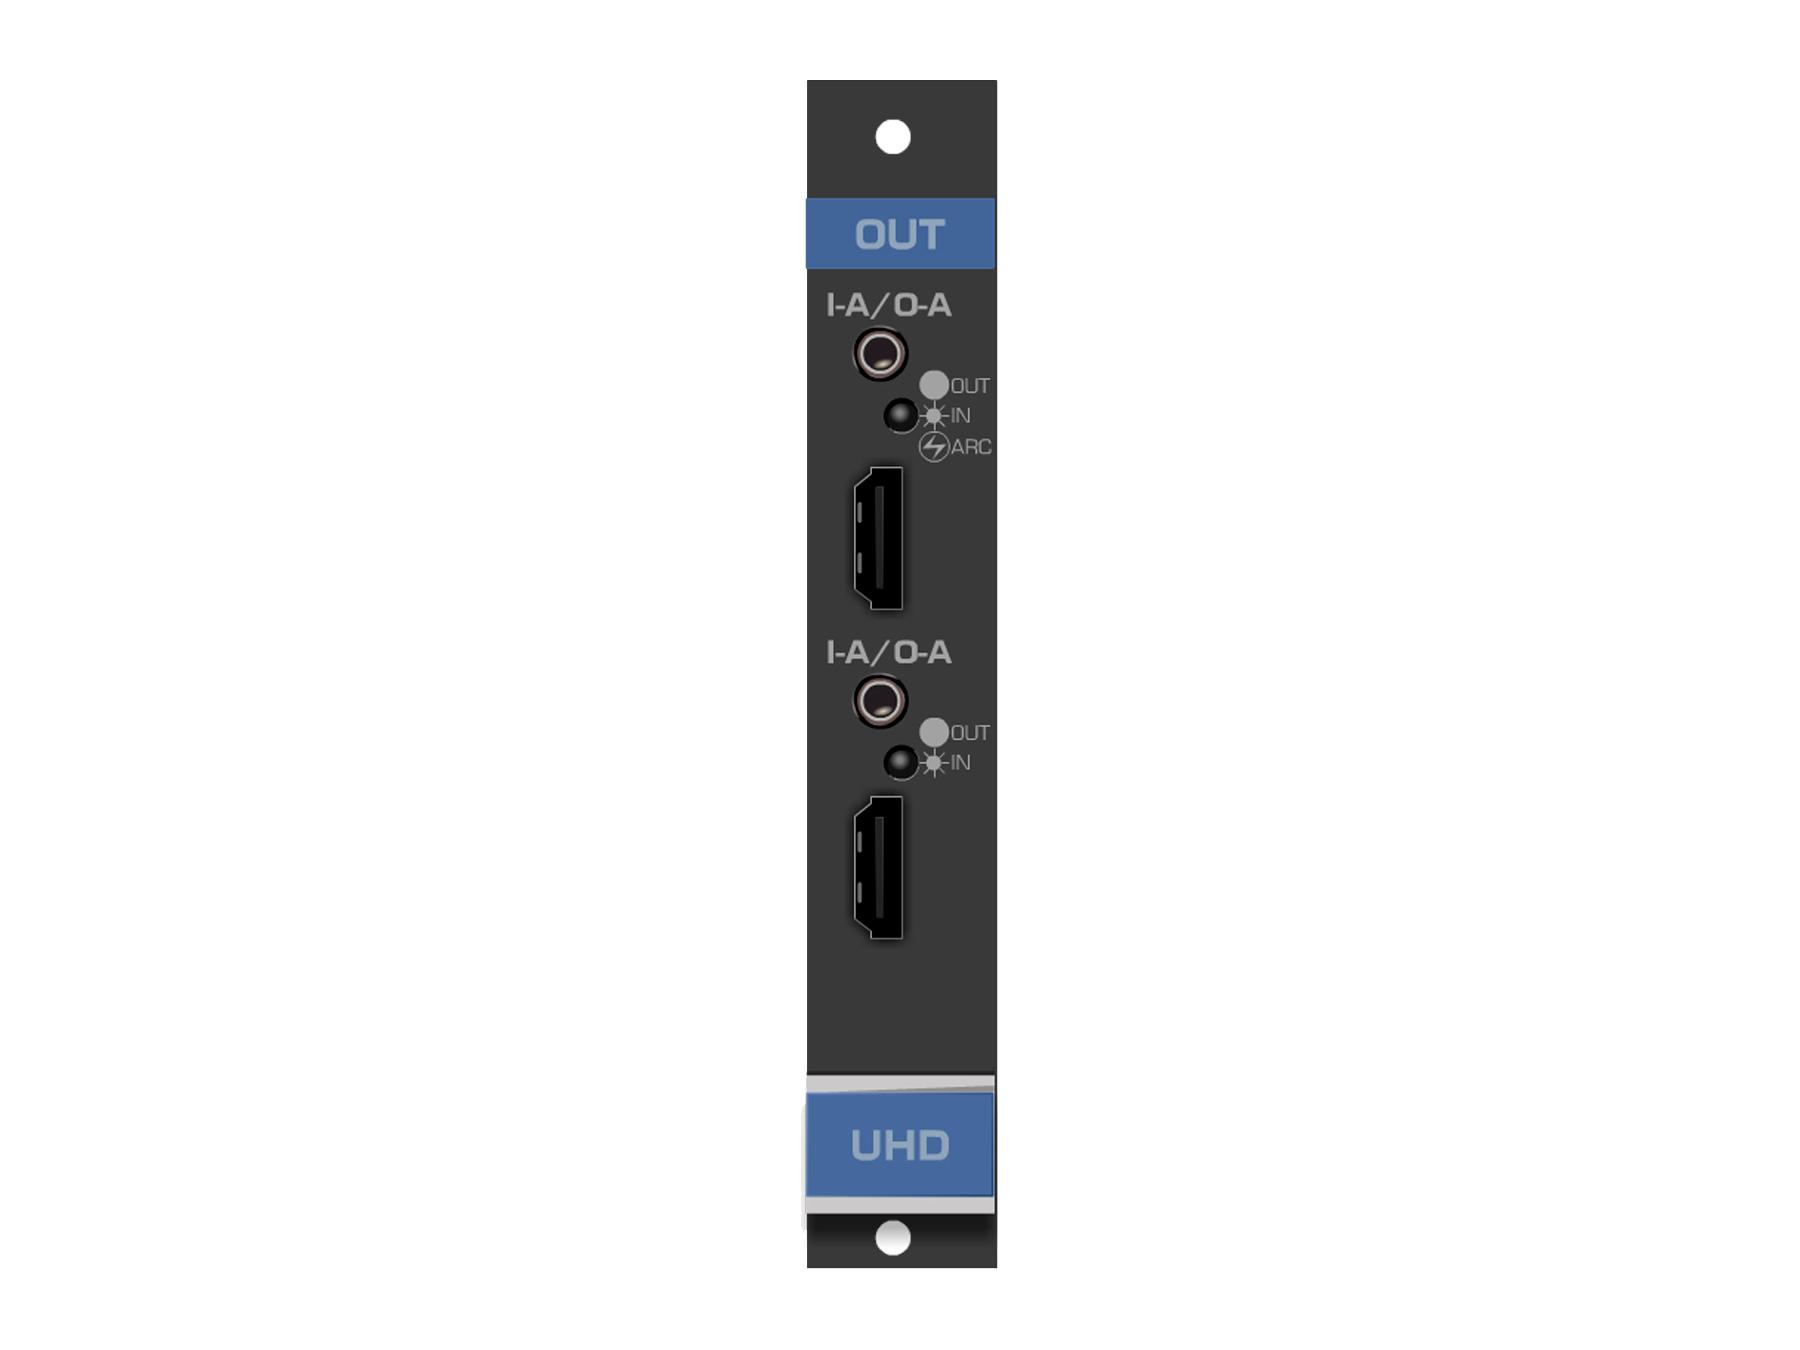 Kramer UHDA-OUT2-F16 2-Output 4K HDMI with Selectable Analog Audio Card for VS-1616D Matrix Switcher (F-16)